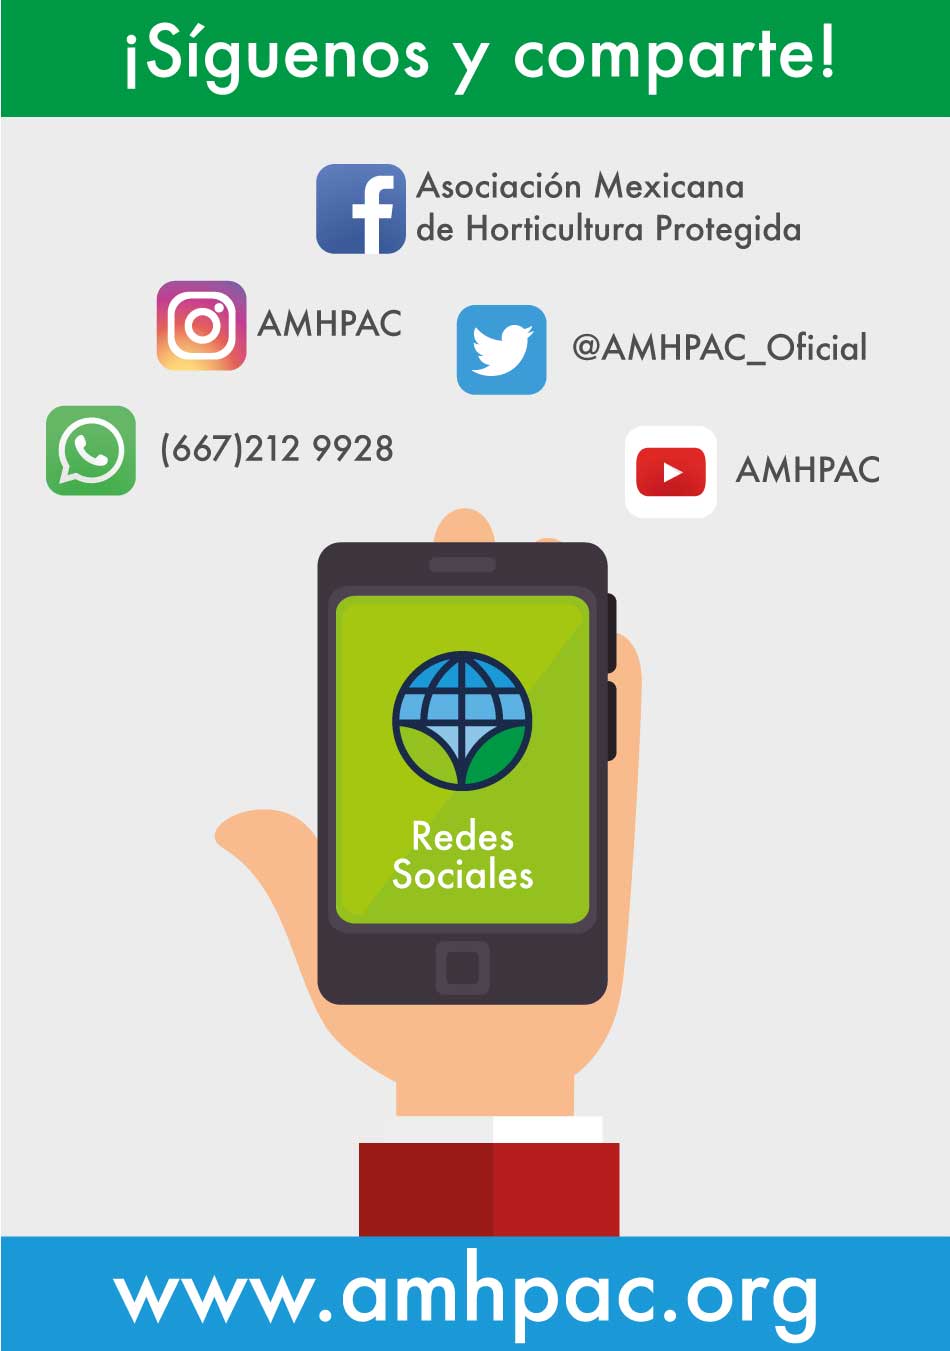 Redes Sociales AMHPAC